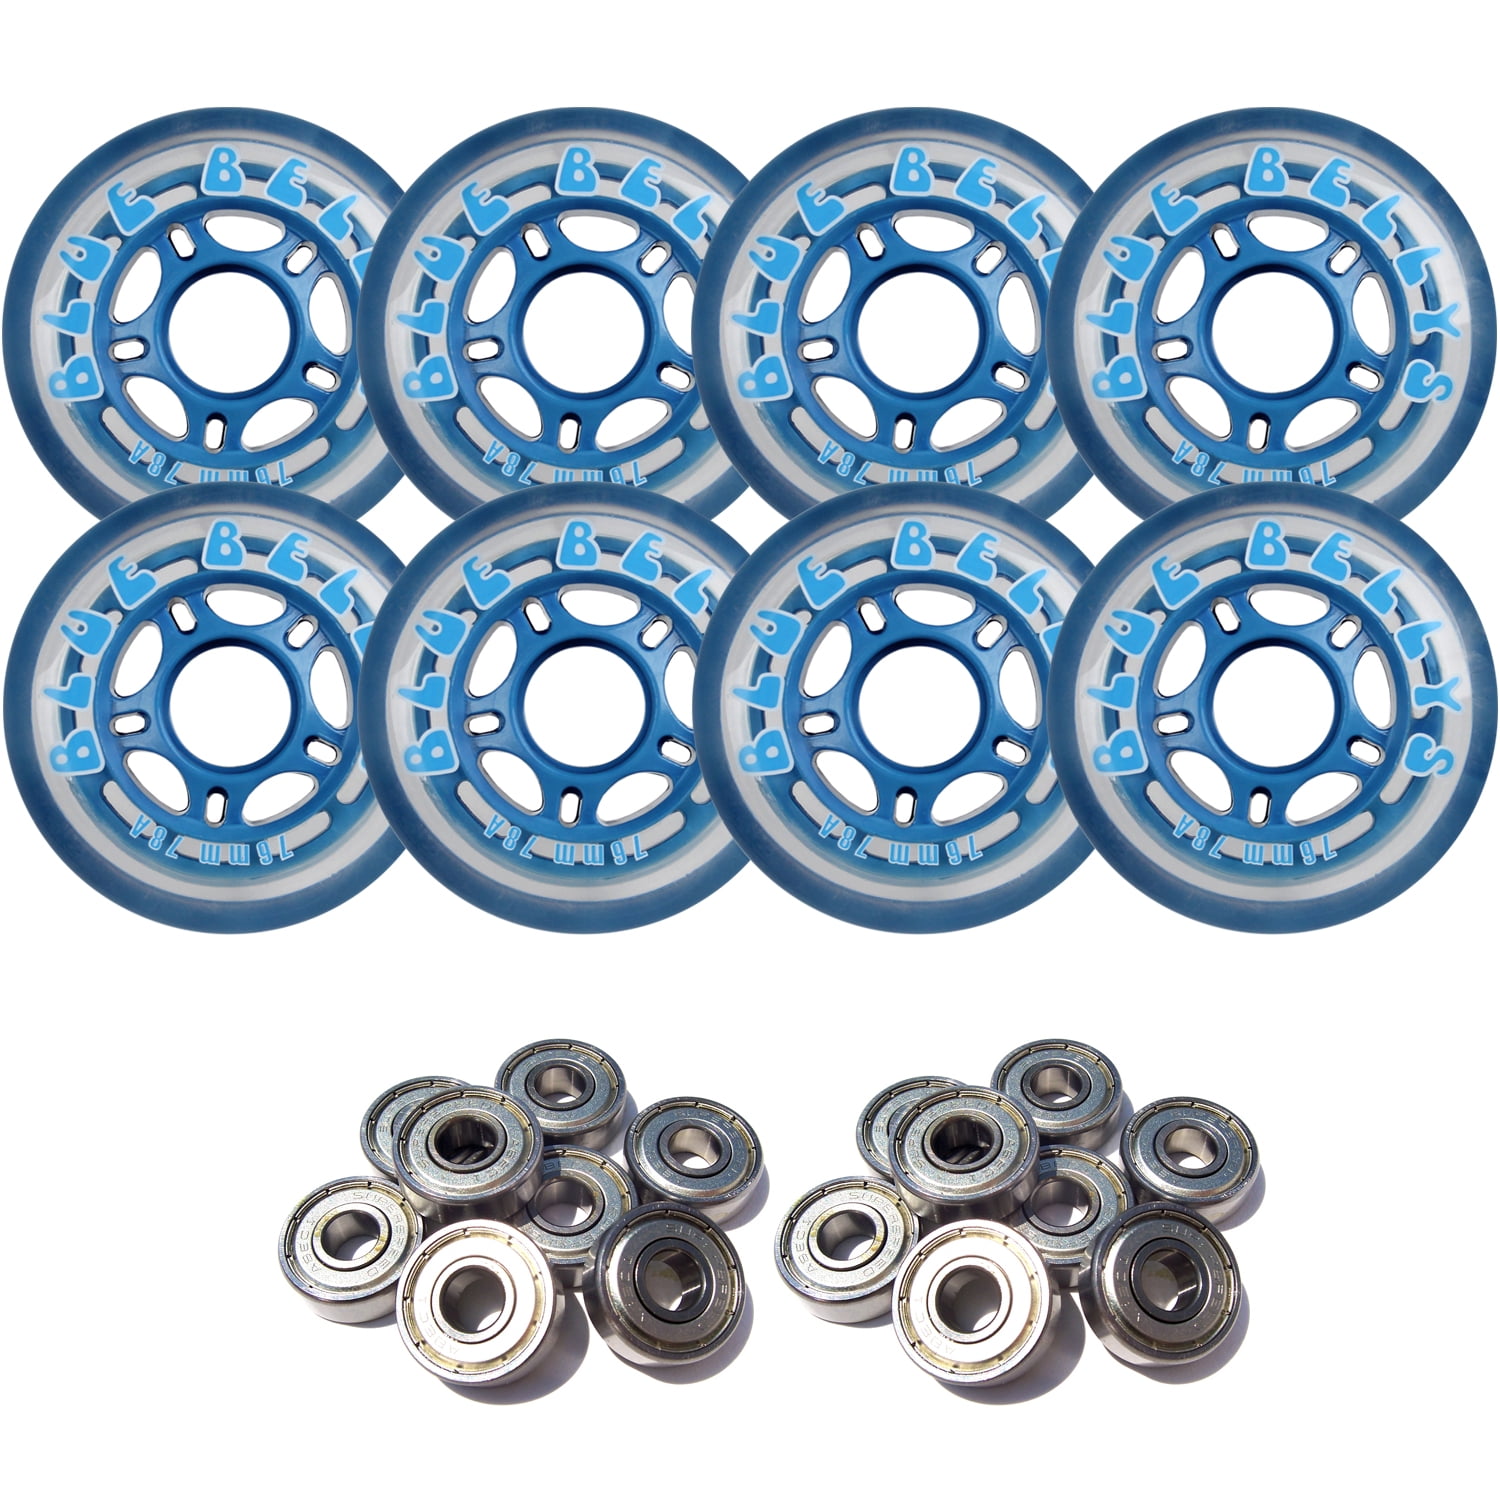 Pack of 4 70mm Pu Wheels with ABEC-7 Bearings 2PM SPORTS Inline Skate Replacement Wheels with White Light,82A 76mm 